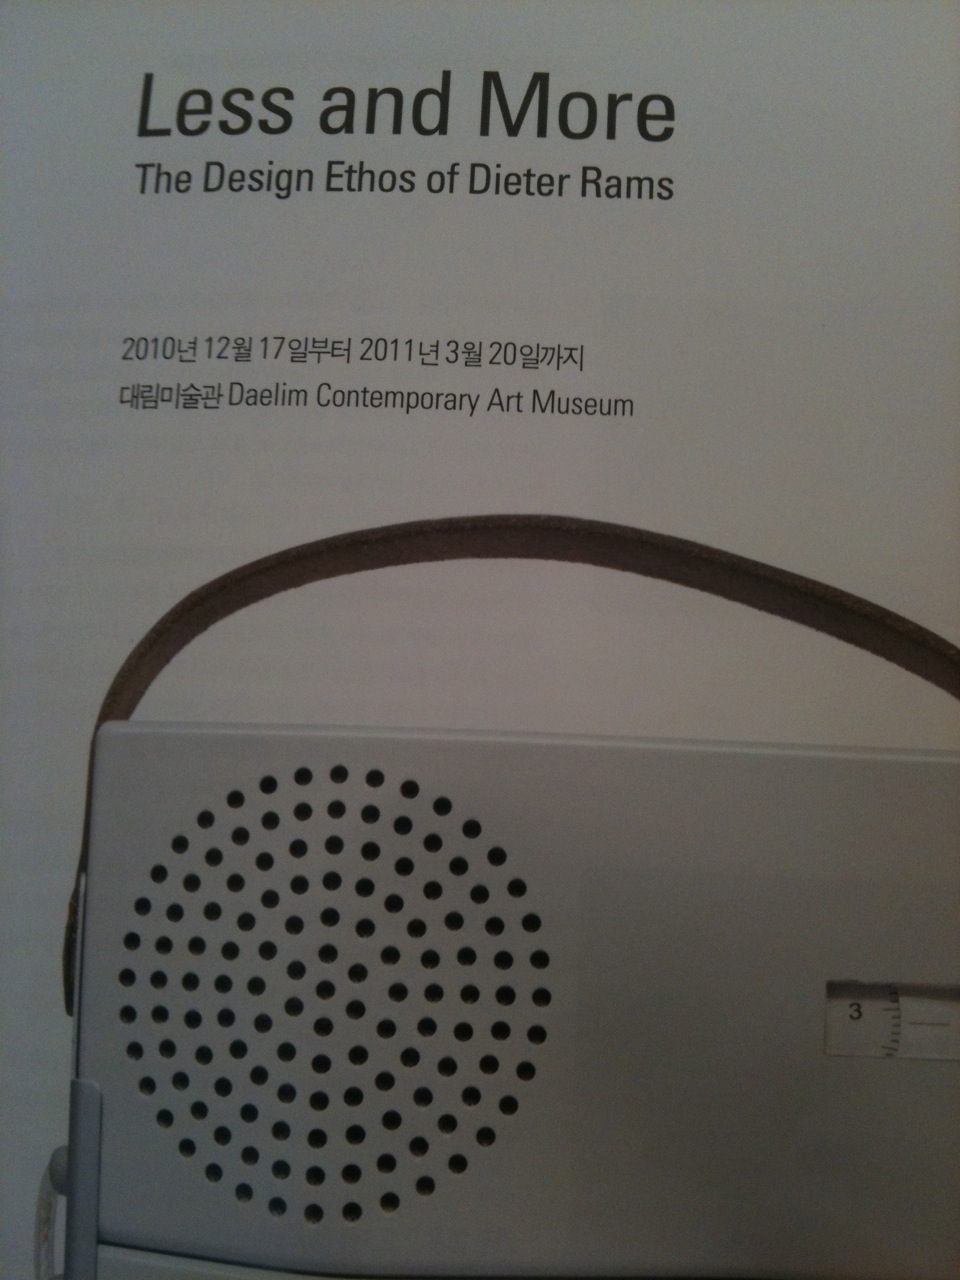 Today's visit to the Dieter Rams Exhibition